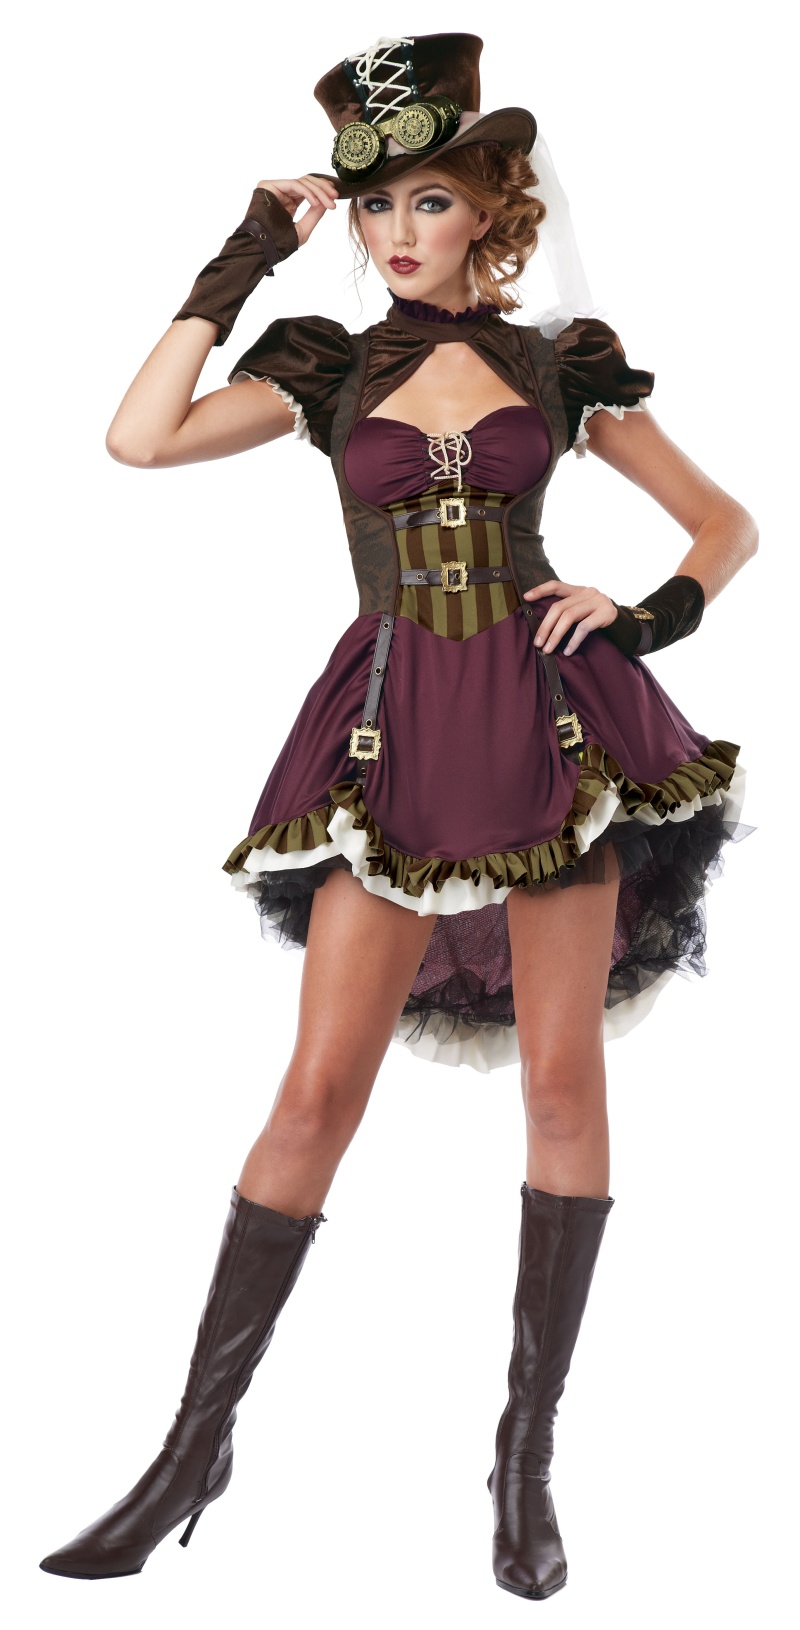 California Costumes Women's Steampunk Adult, Burgundy/Brown, X-Large